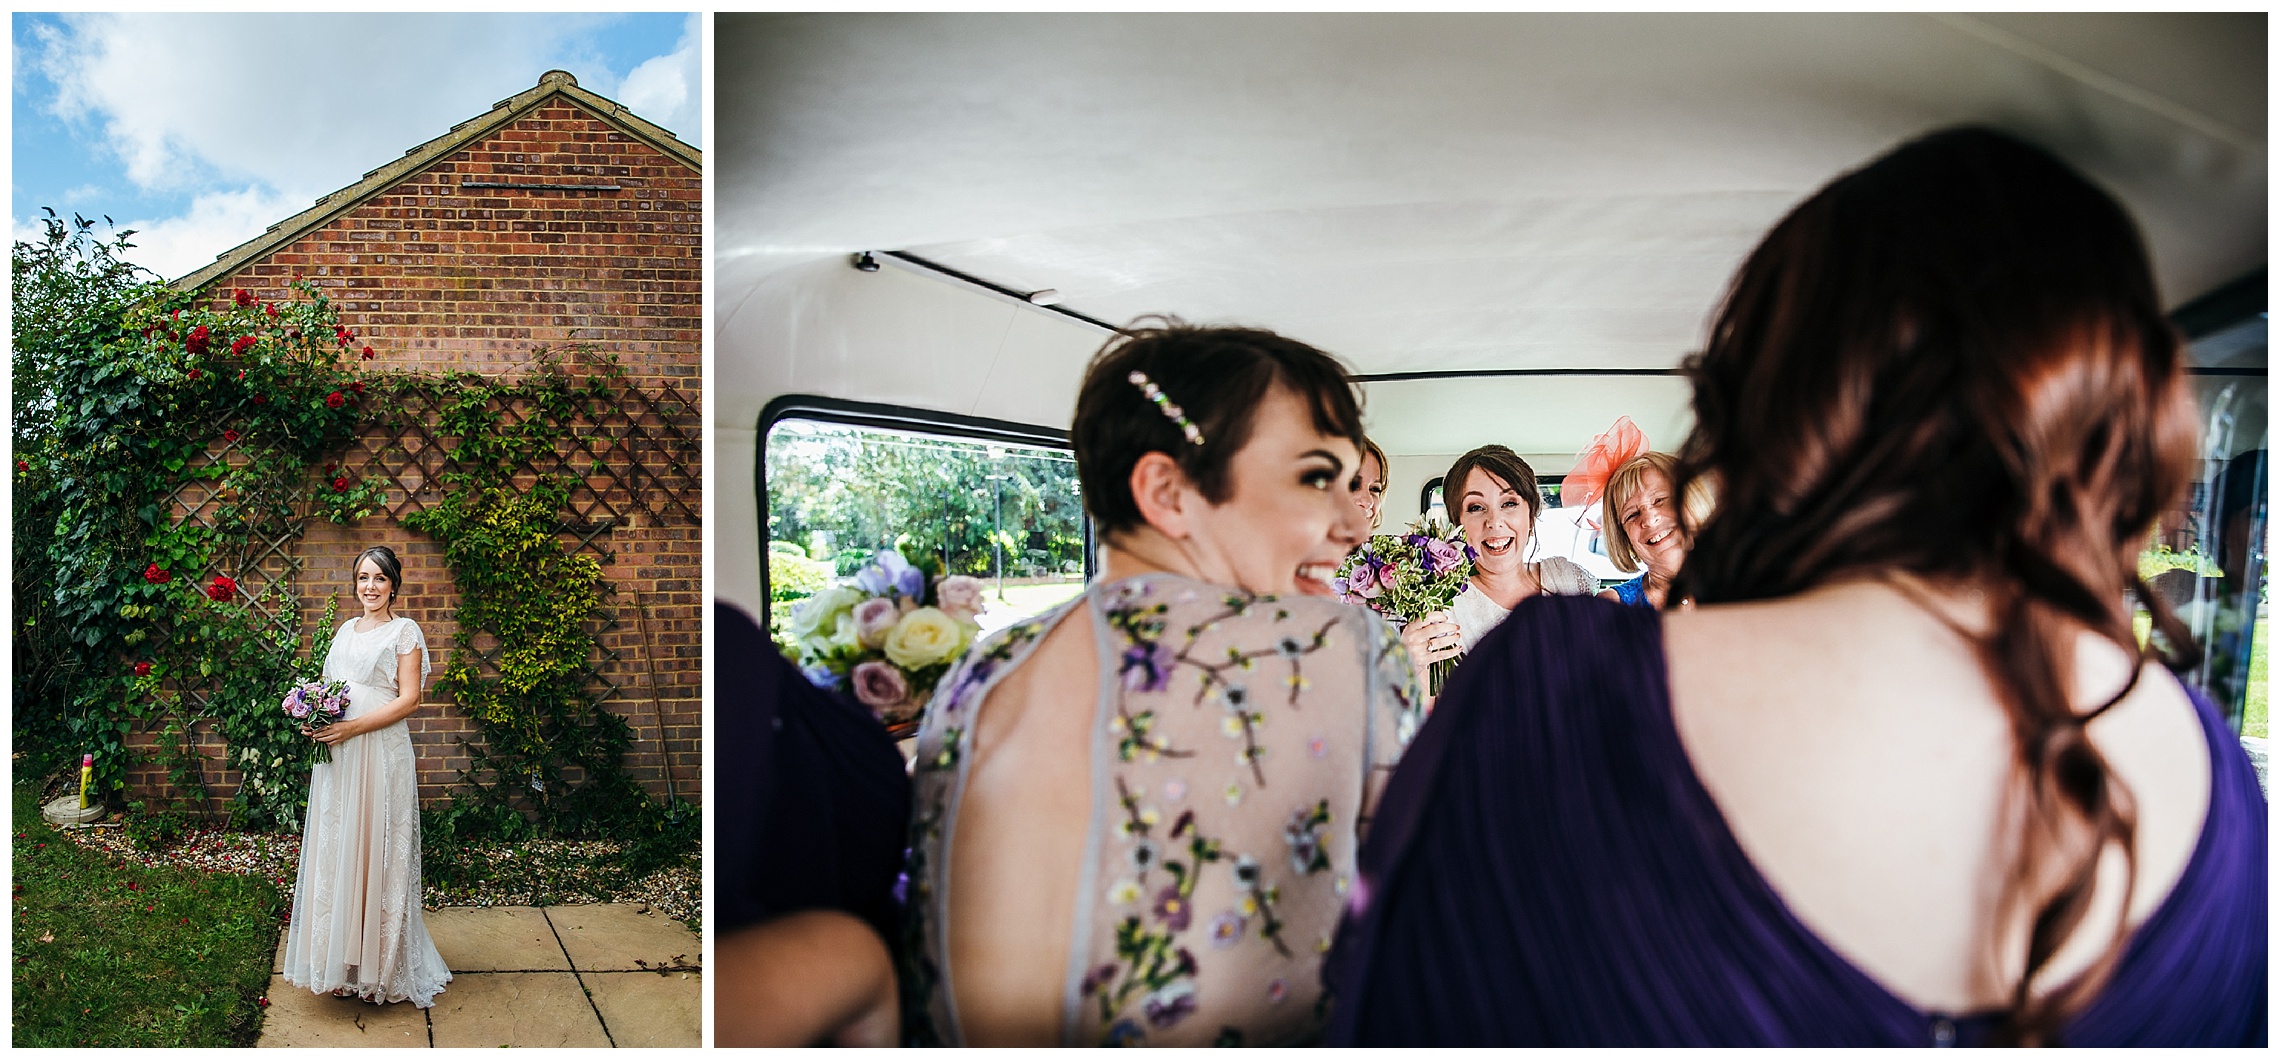 bride laughing in bridal car with bridesmaids around her